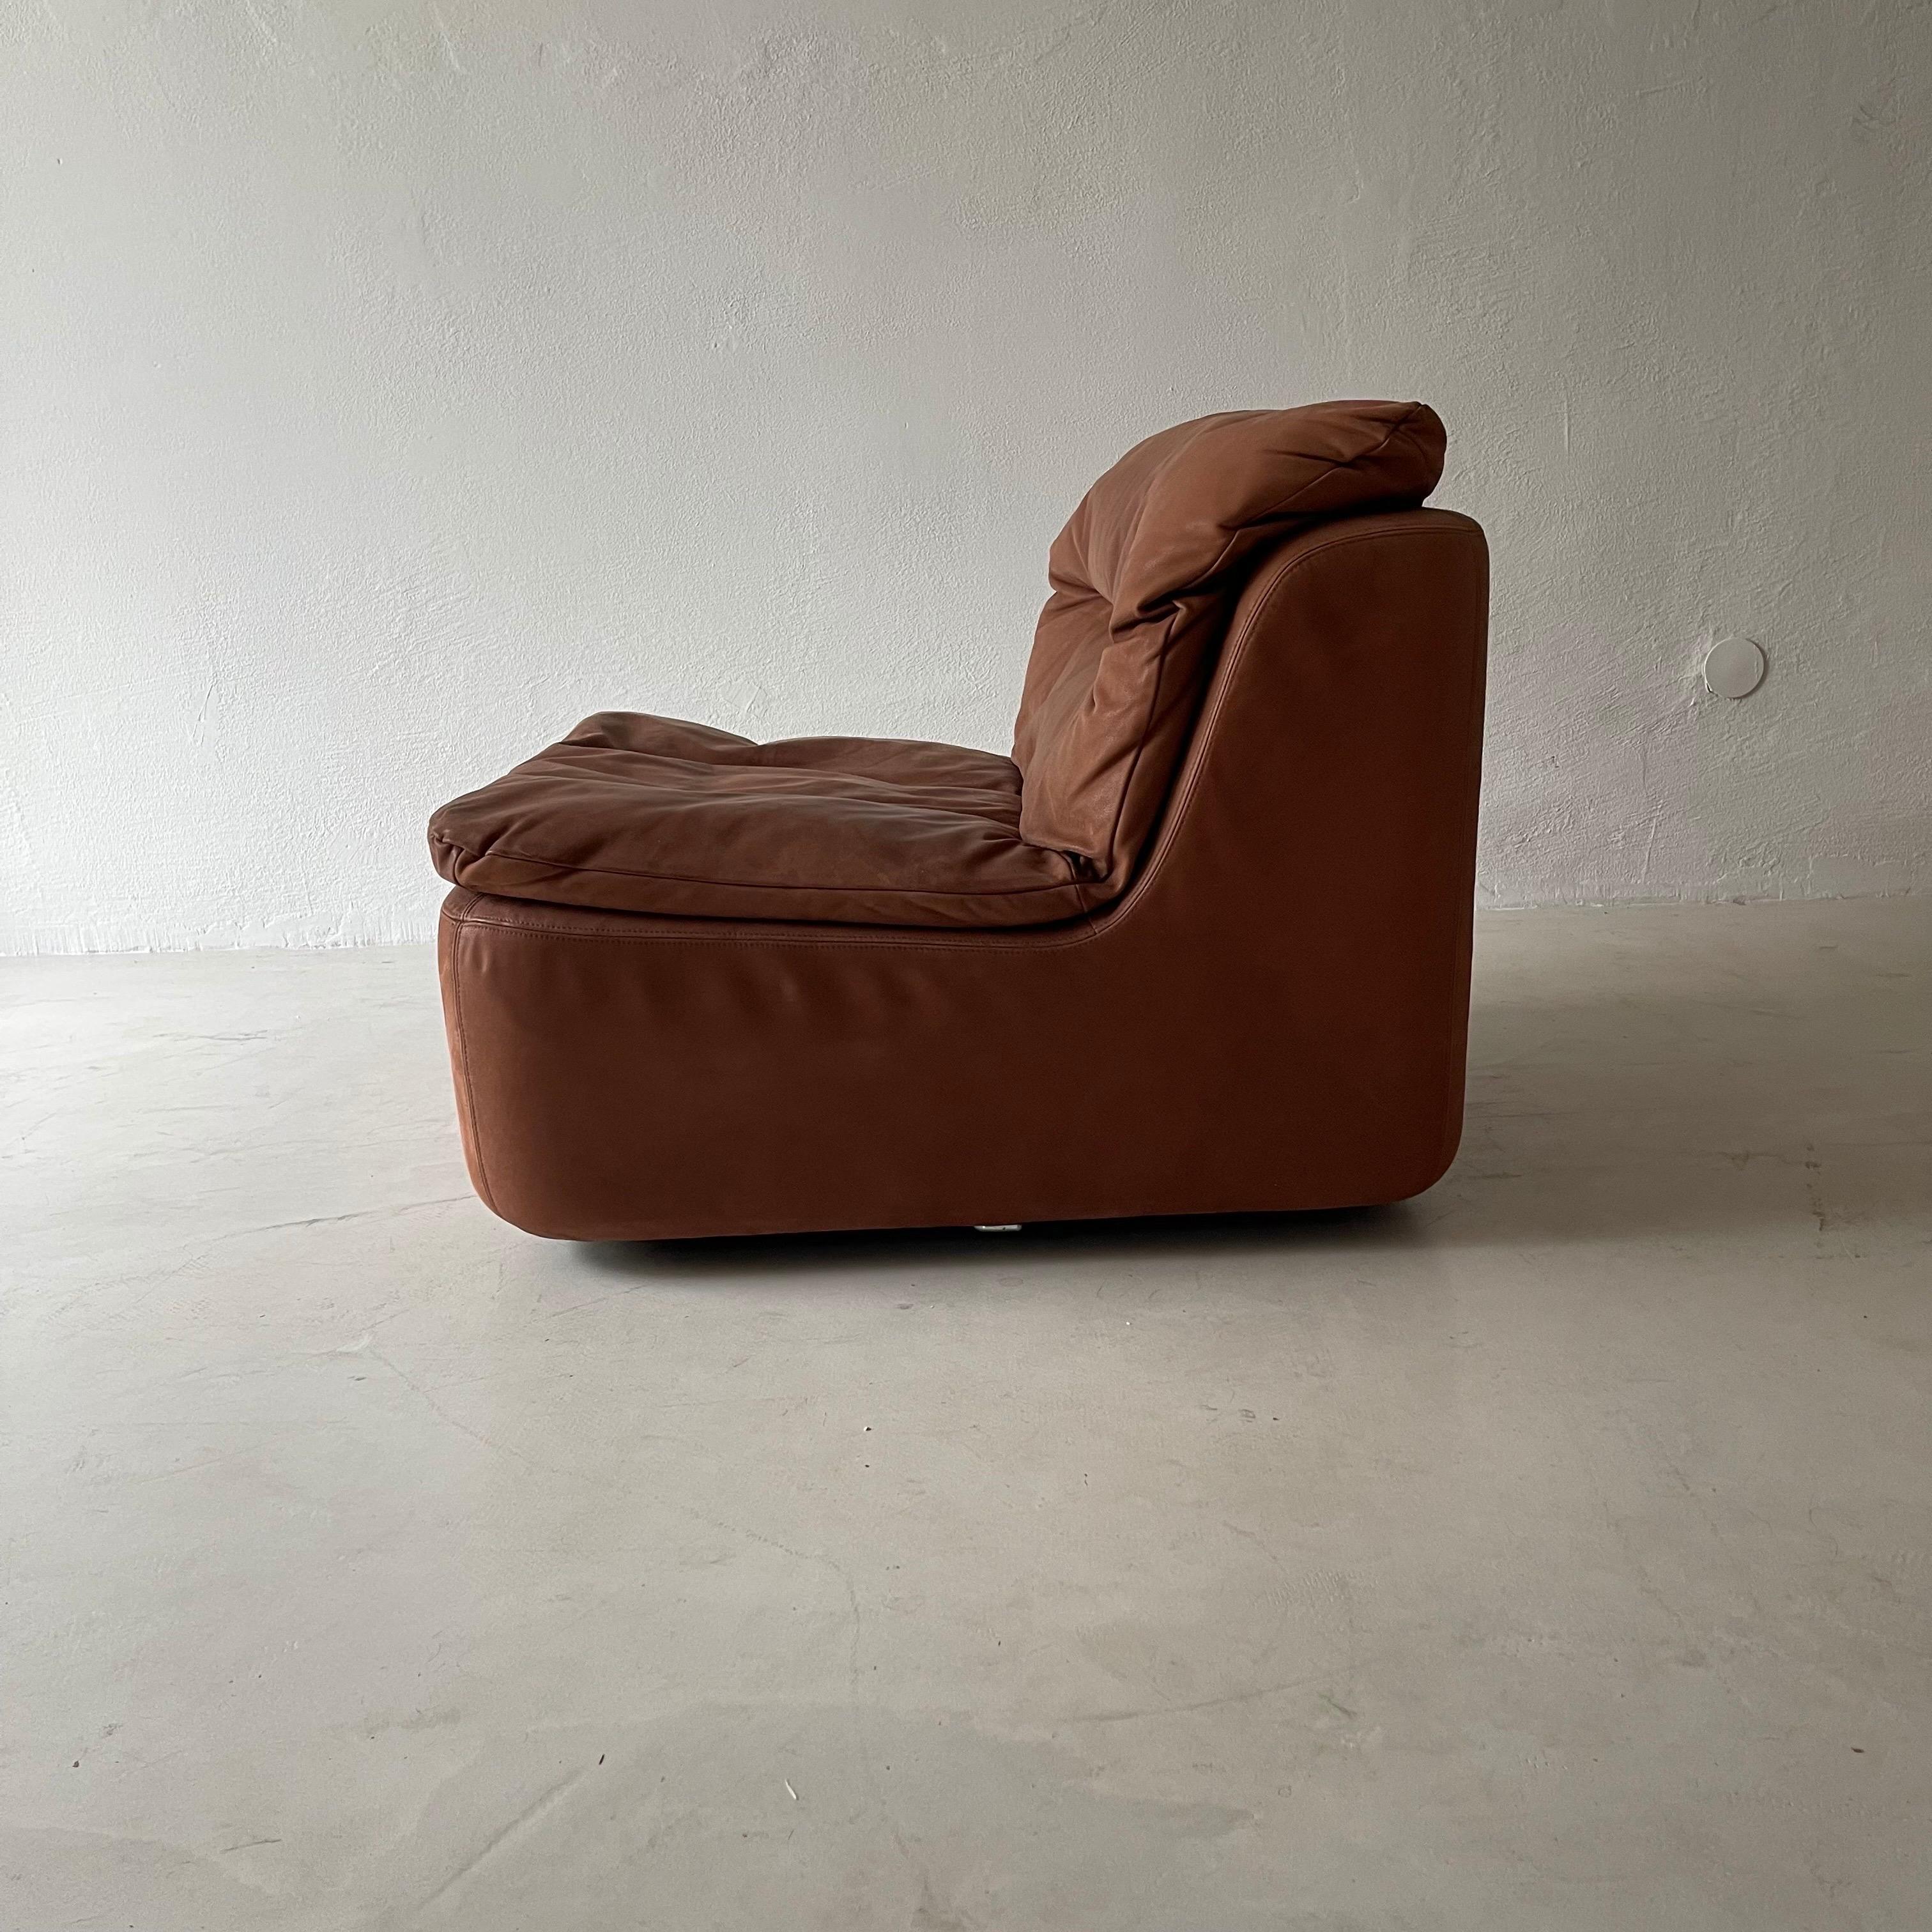 Vintage Modular Sofa by Friedrich Hill for Walter Knoll 1970s For Sale 6